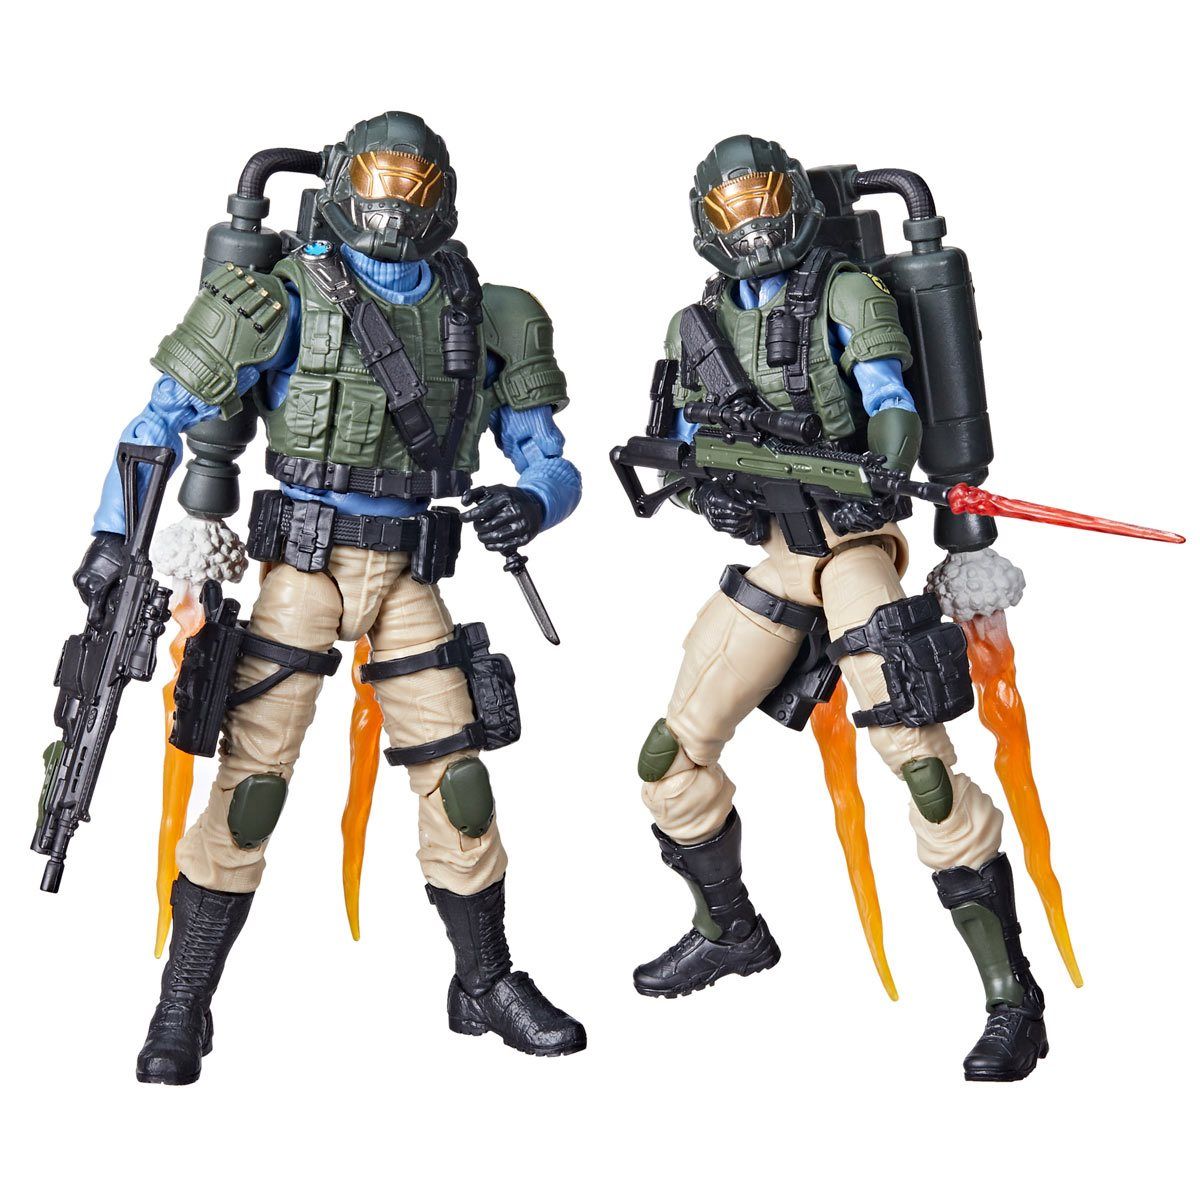 Battle Against Cobra with the All-New GI Joe Classified Series Steel Corps  Troopers 2-Pack